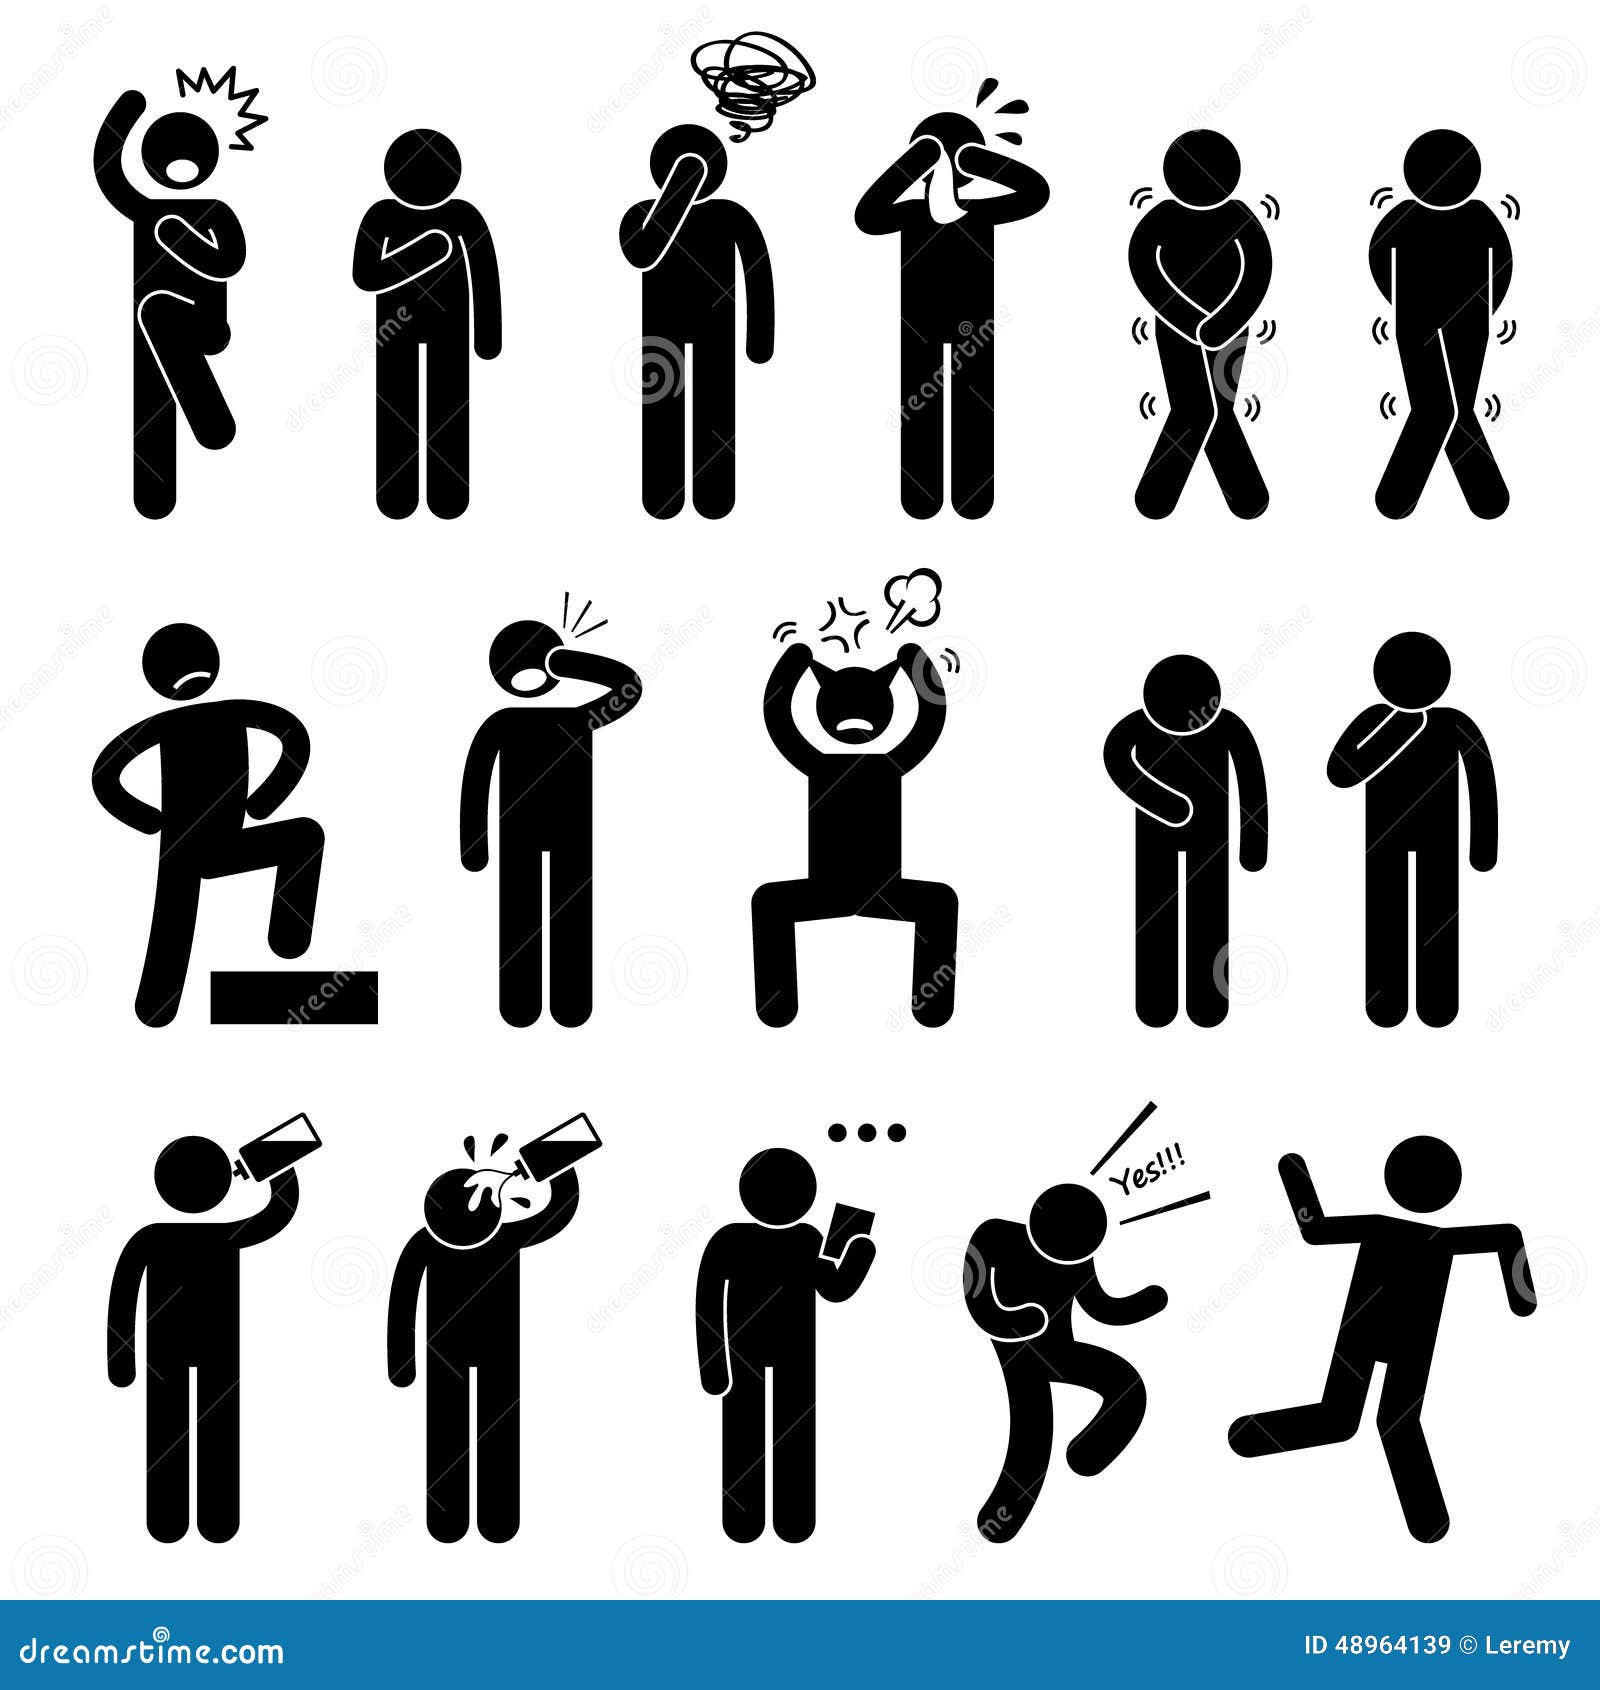 Human Action Poses Postures Icons Stock Illustrations – 35 Human Action  Poses Postures Icons Stock Illustrations, Vectors & Clipart - Dreamstime